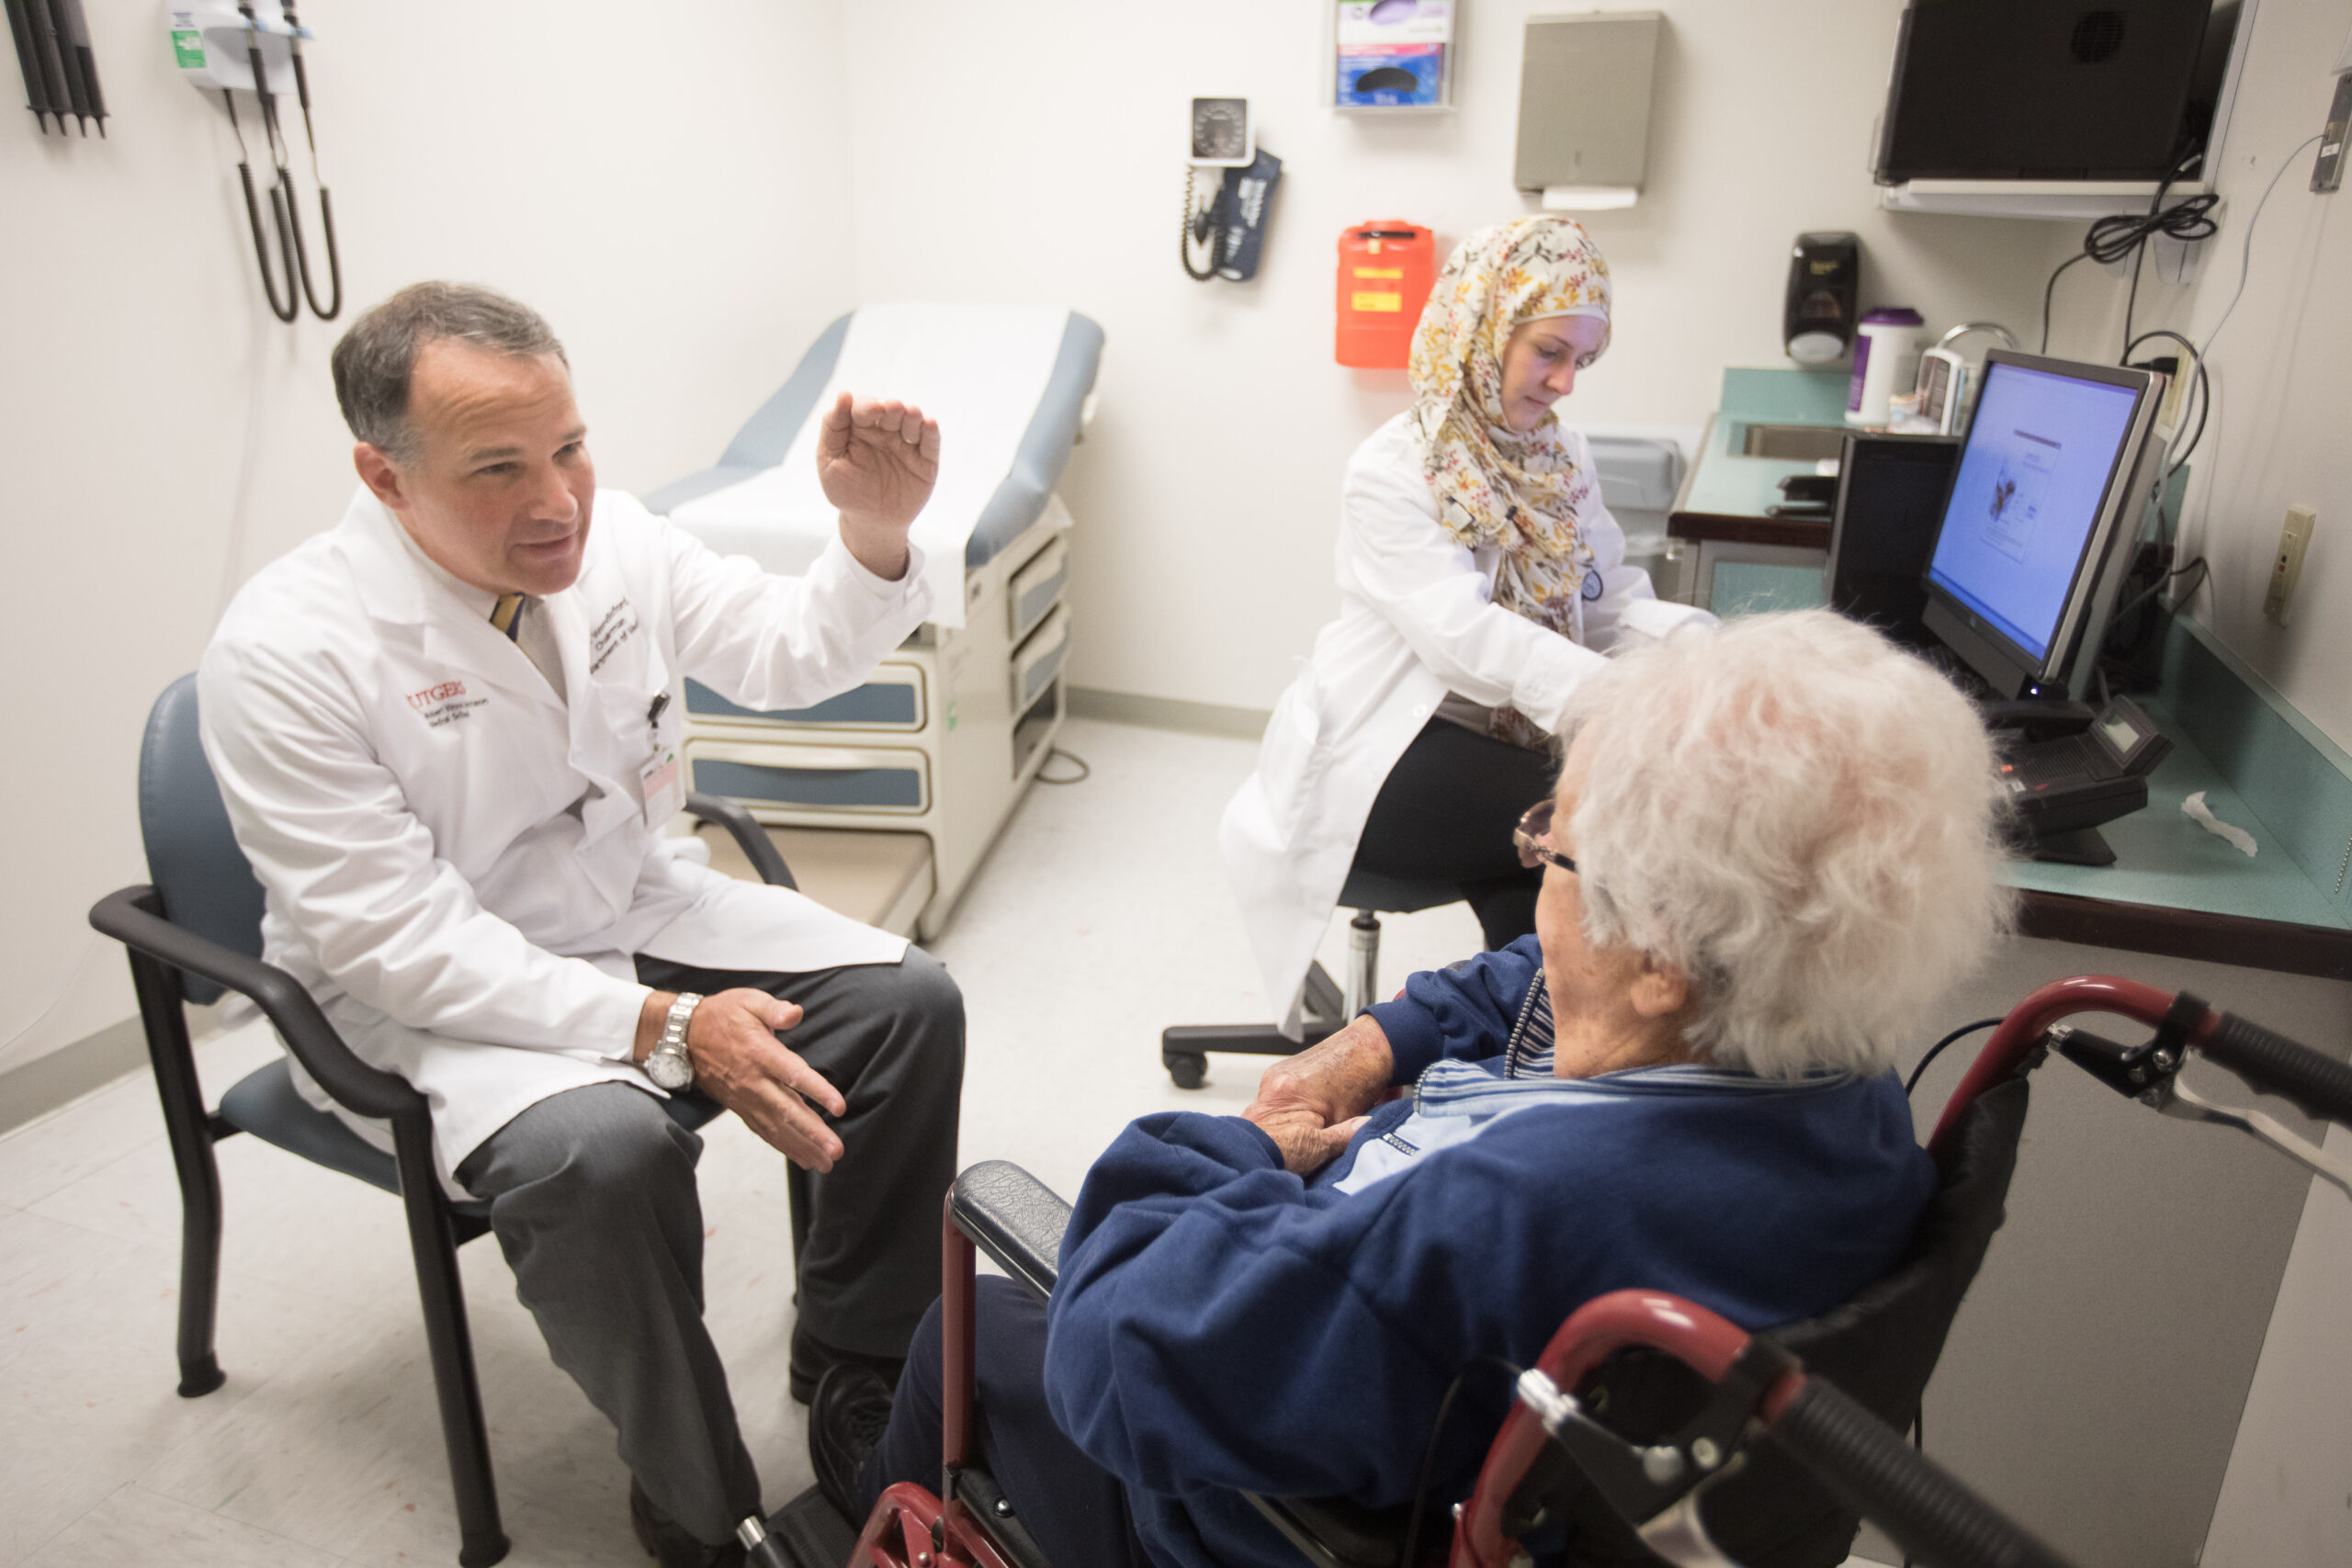 Professor, Chairman of Medicine and Chancellor Scholar, Rutgers-Robert Wood Johnson School of Medicine Fredric E. Wondisford, MD meets with patient Shirley Brick Cardiology Fellow Juman Takeddin takes notes